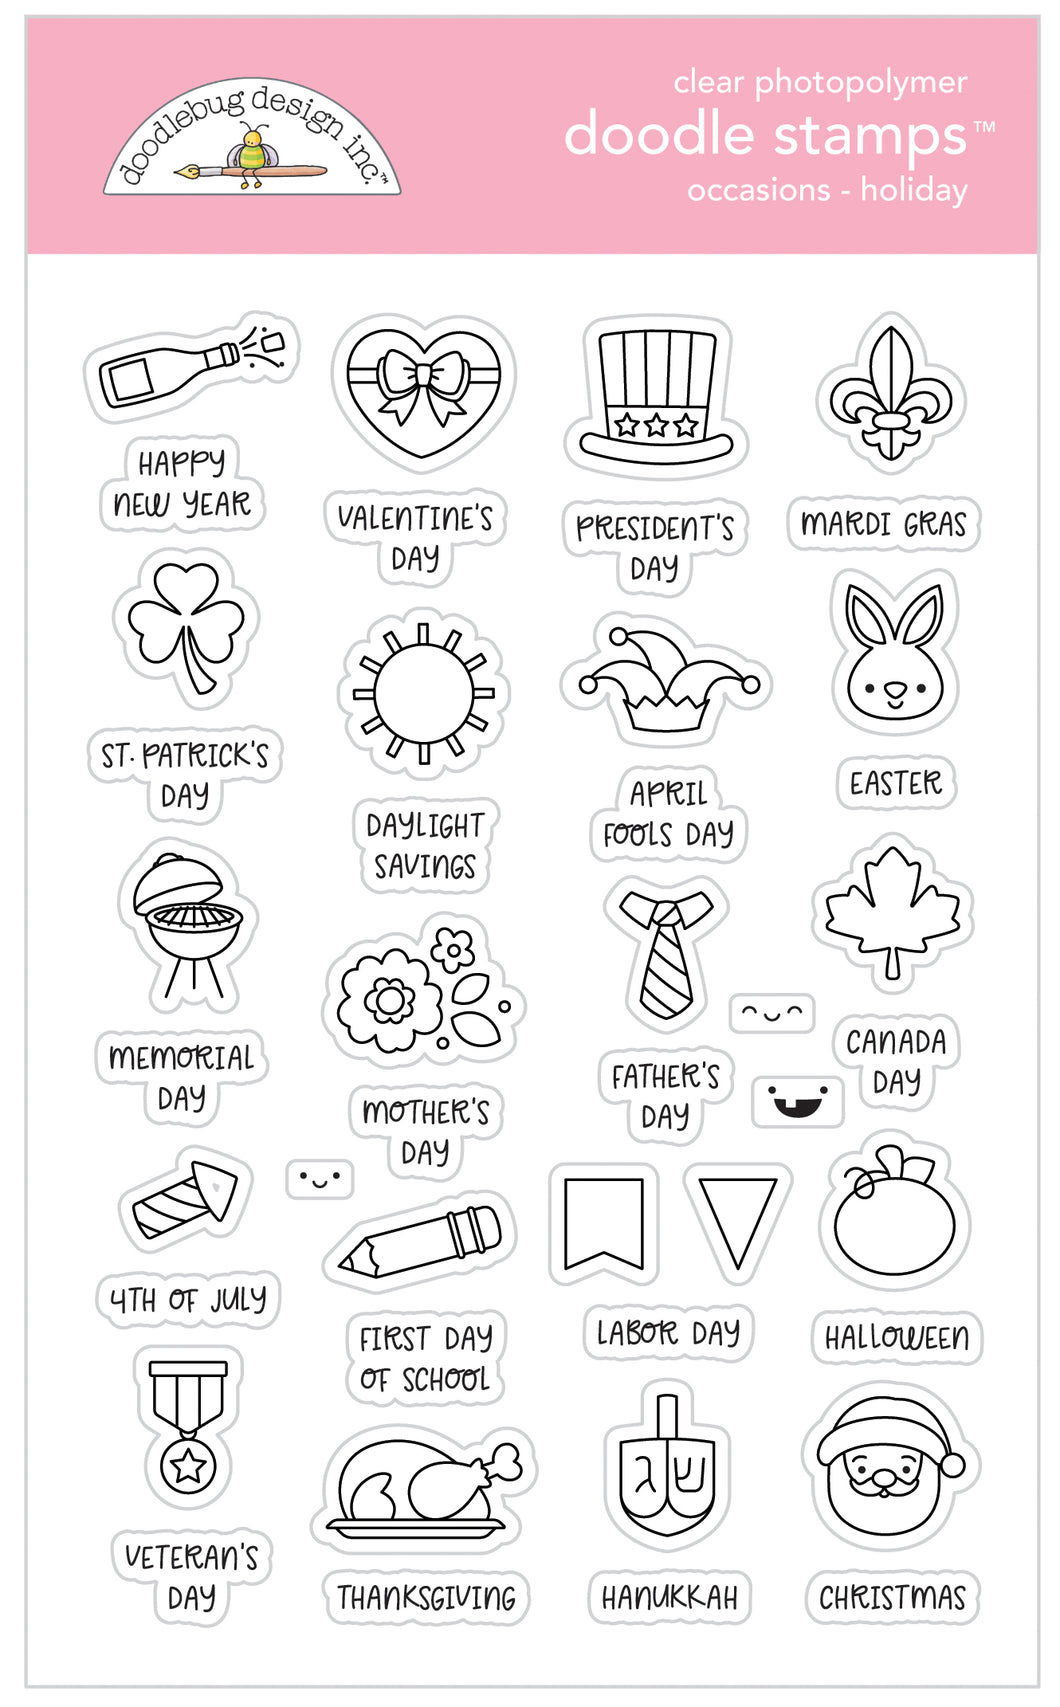 Occasions - Holiday Doodle Stamps